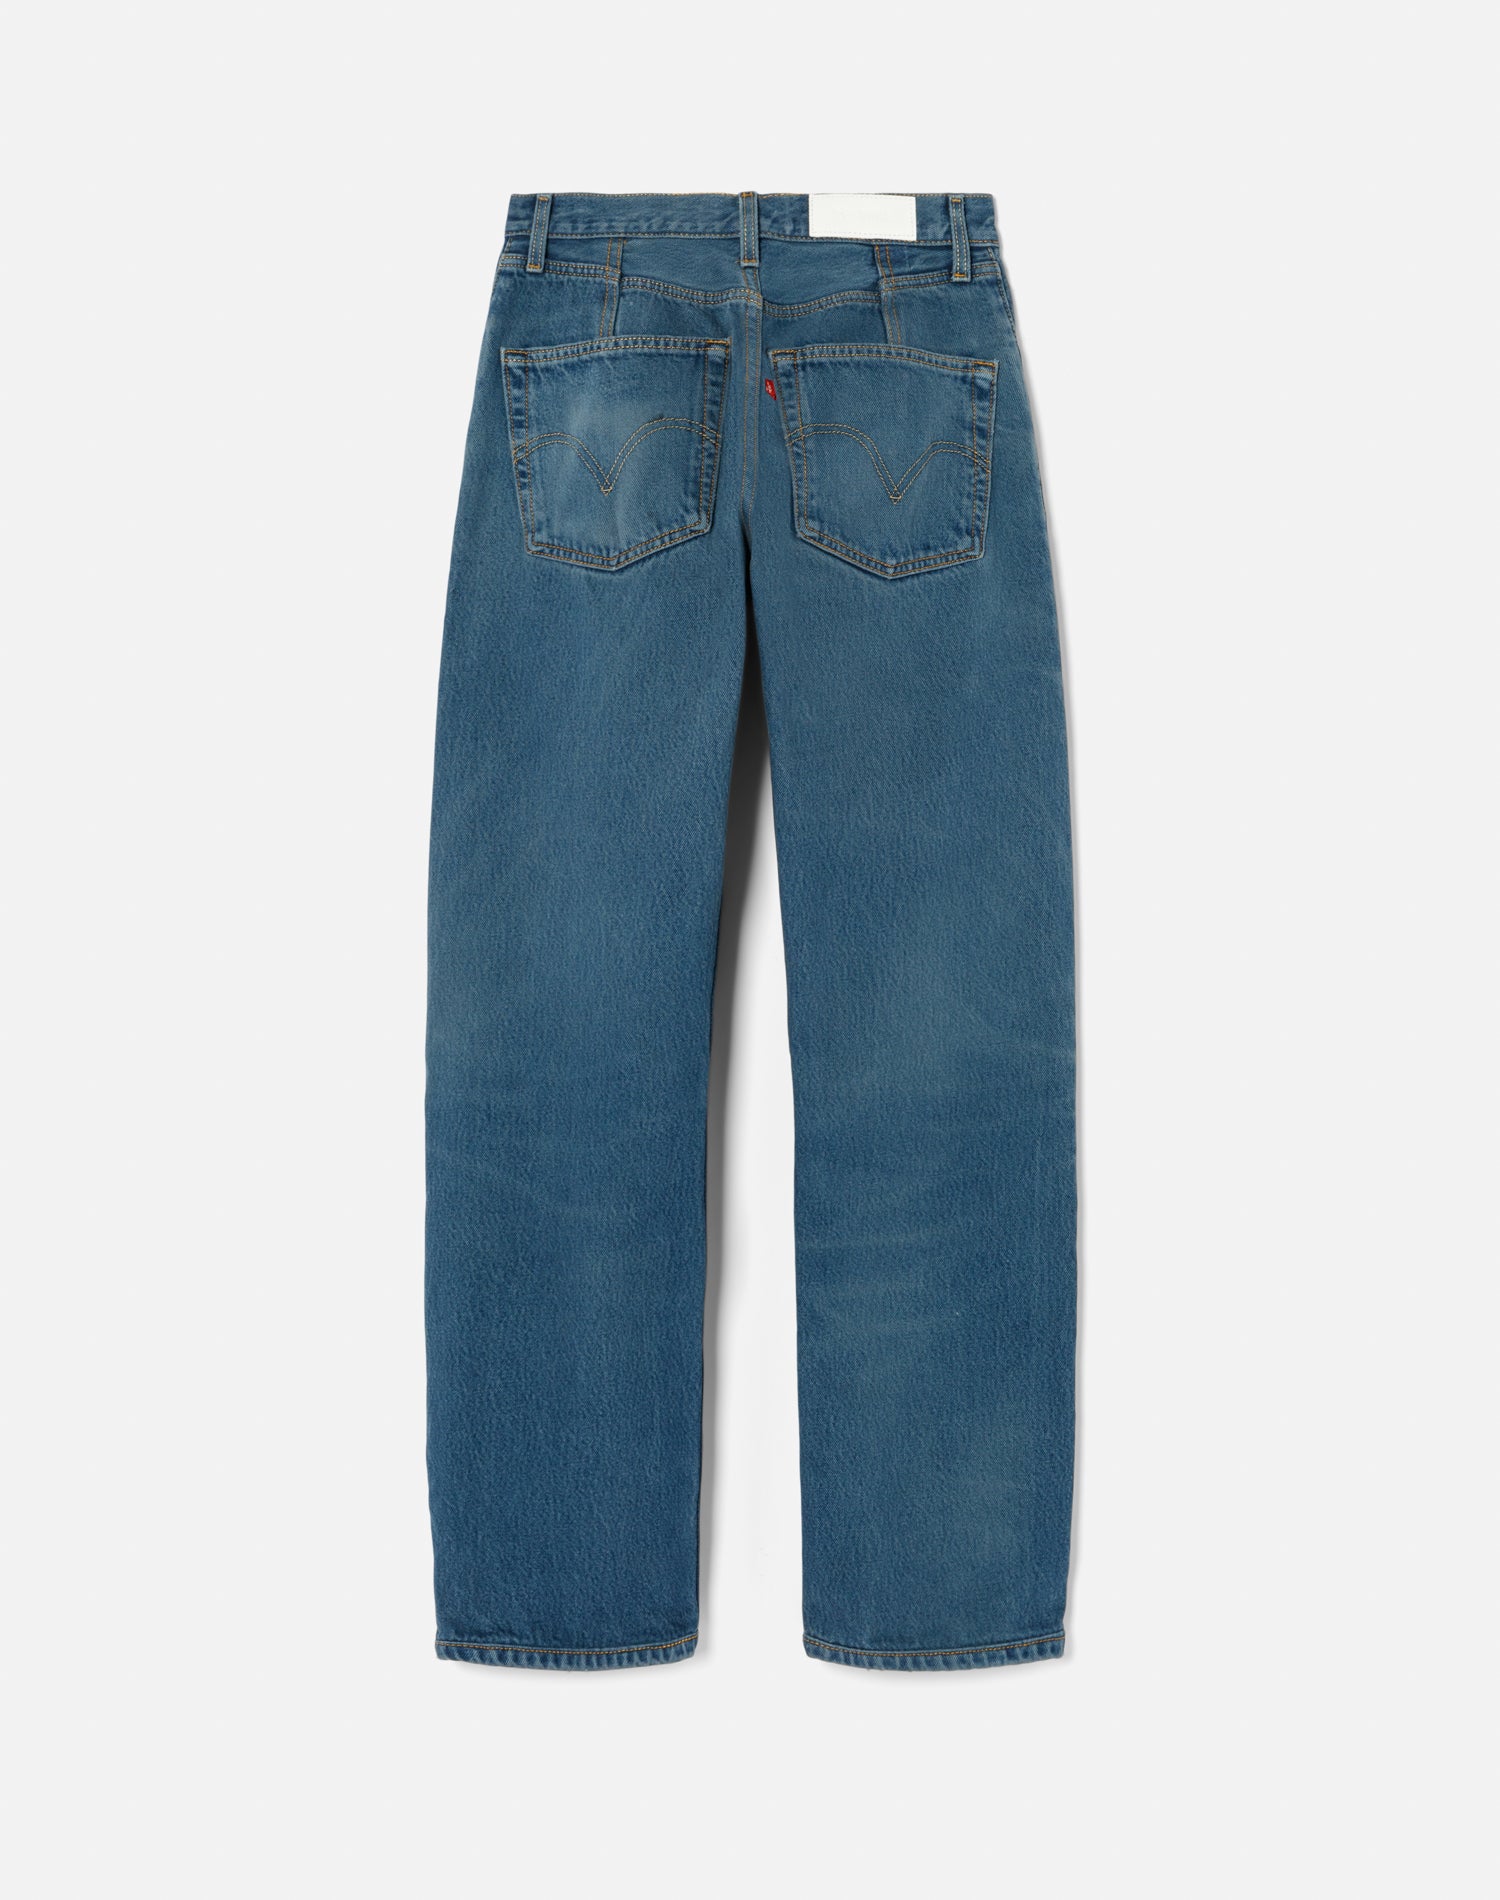 Levi's 90s Jean - Tinted Steel Blue